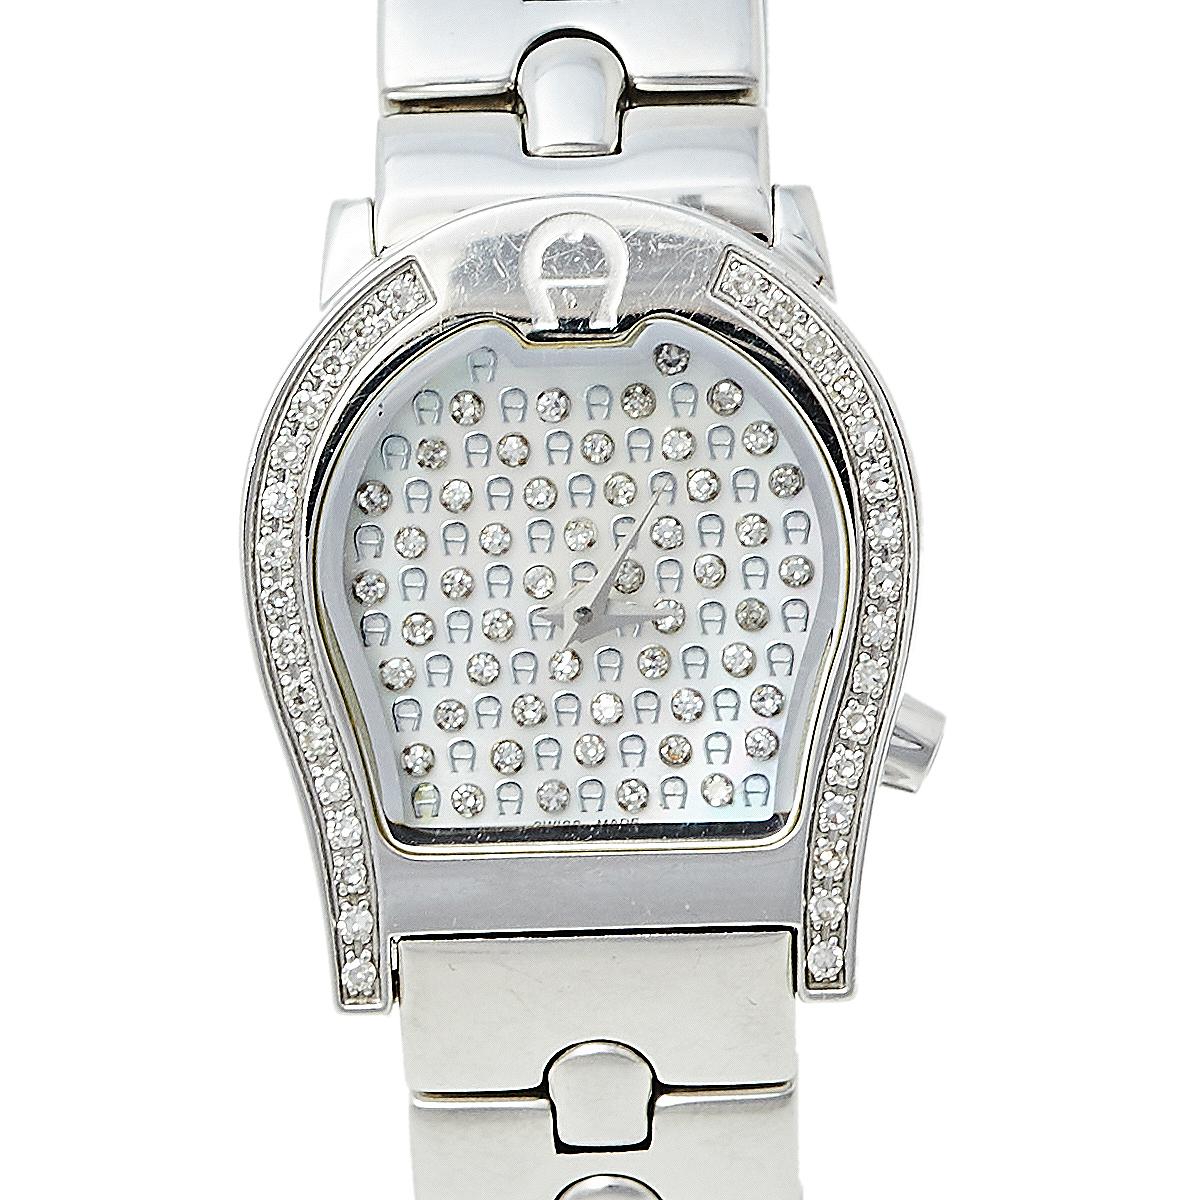 Contemporary Aigner Mother of Pearl Stainless Steel Diamond Verona Women's Wristwatch 24 mm